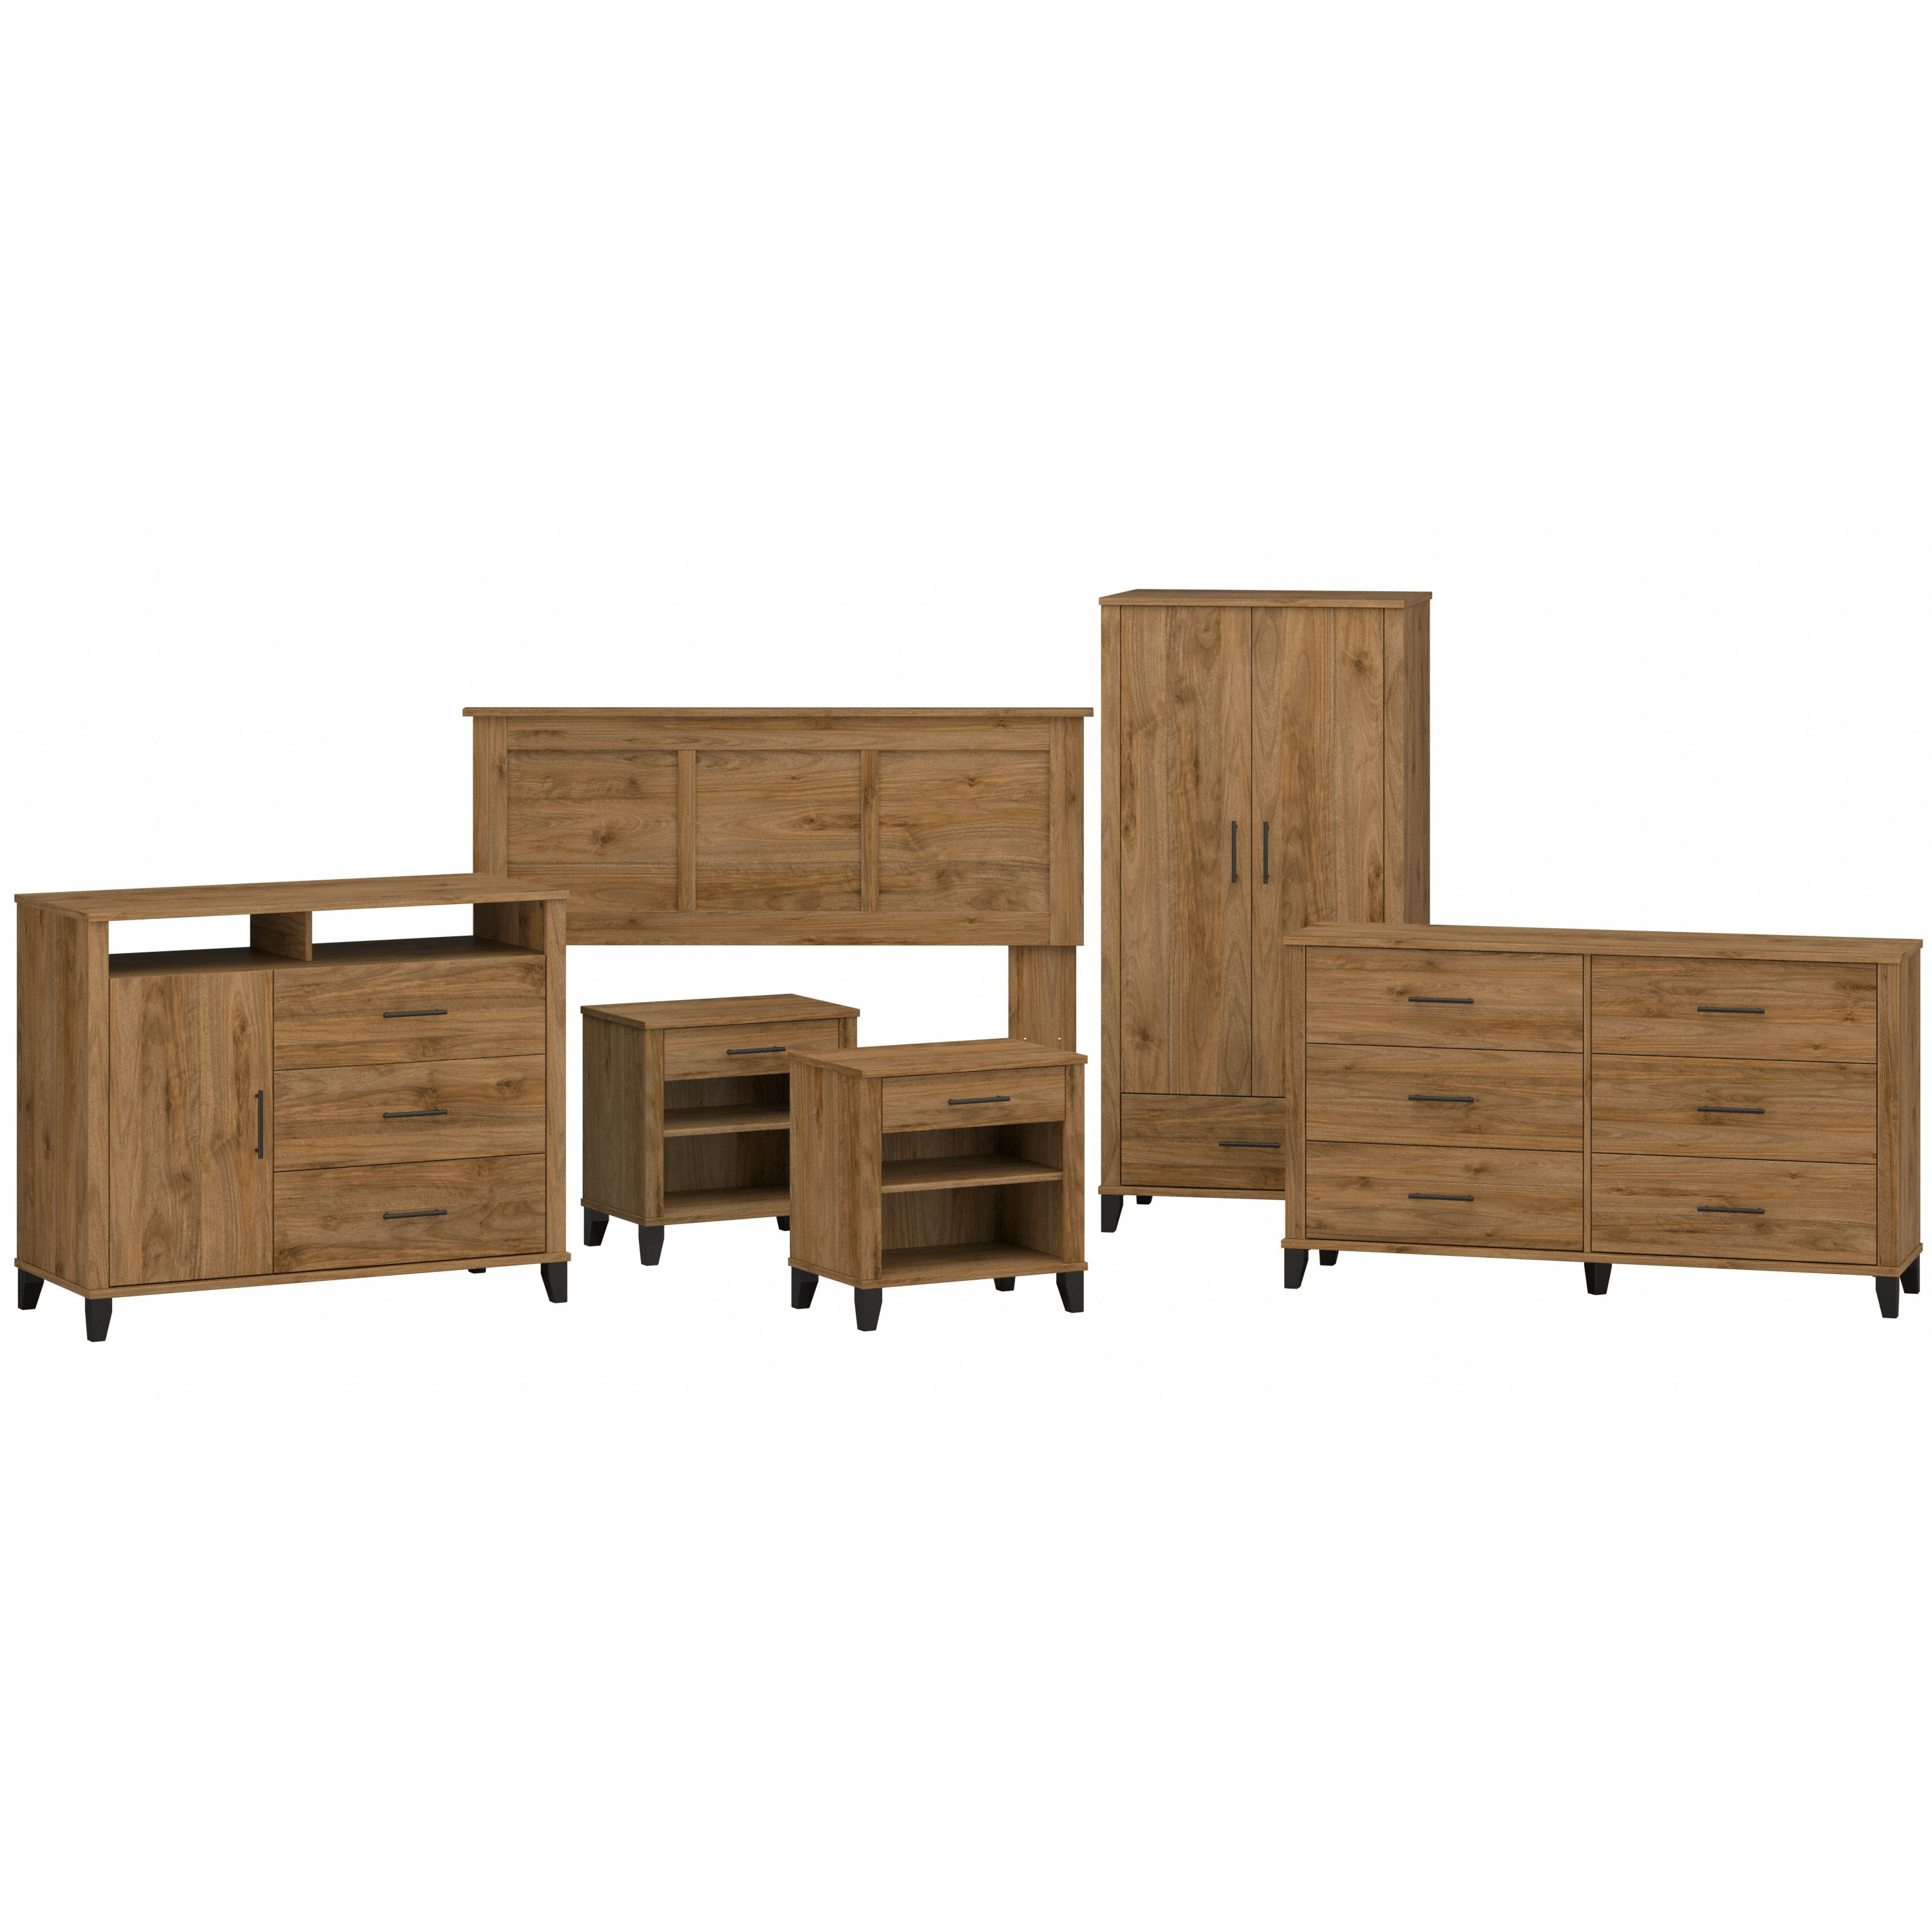 Shop Bush Furniture Somerset 6 Piece Bedroom Set with Full/Queen Size Headboard and Storage 02 SET037FW #color_fresh walnut